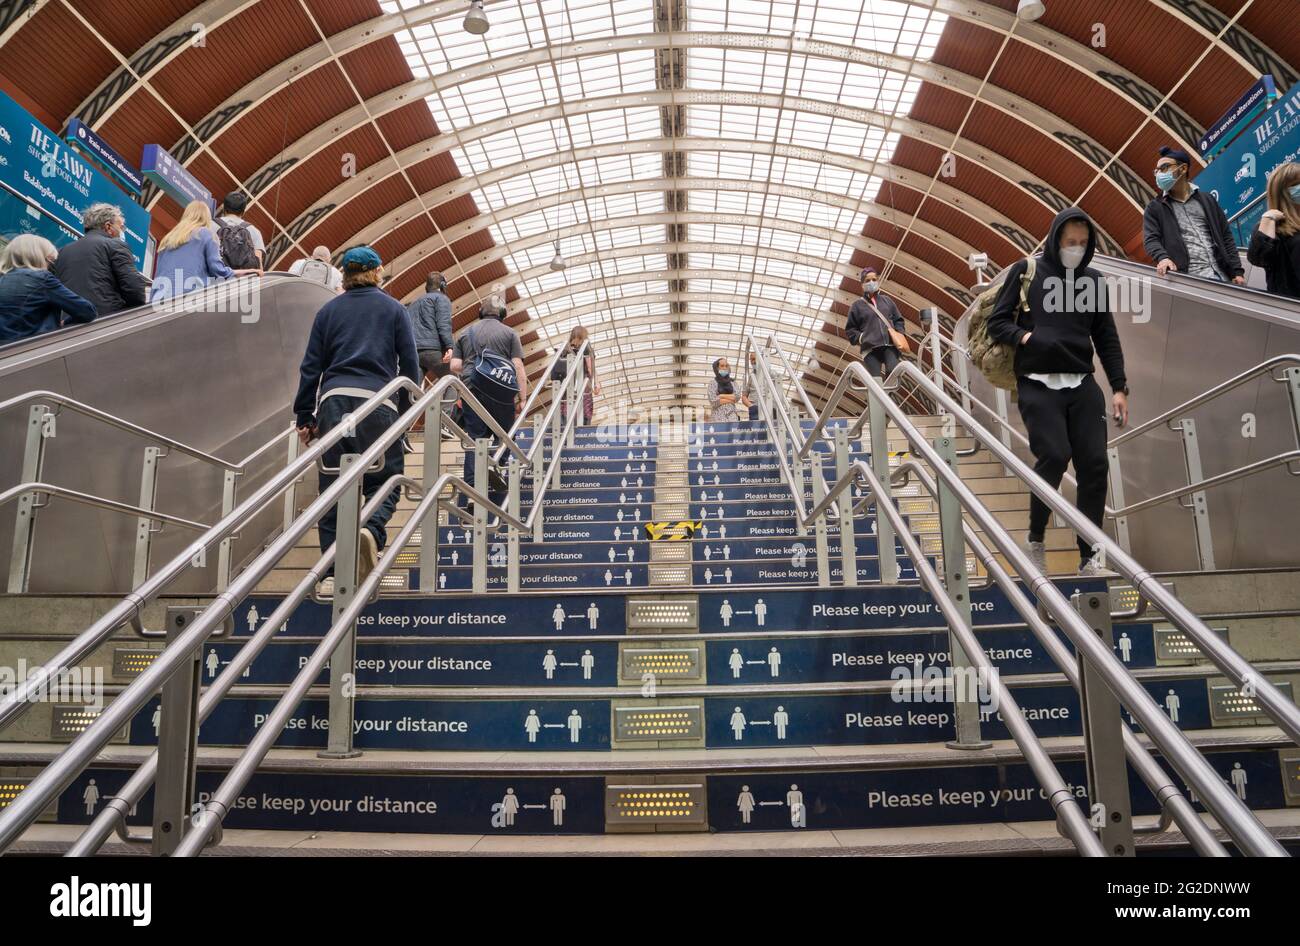 Passengers and staff at Paddington train station in London wearing masks and keeping social distance due to COVID-19 pandemic. England, UK. Stock Photo